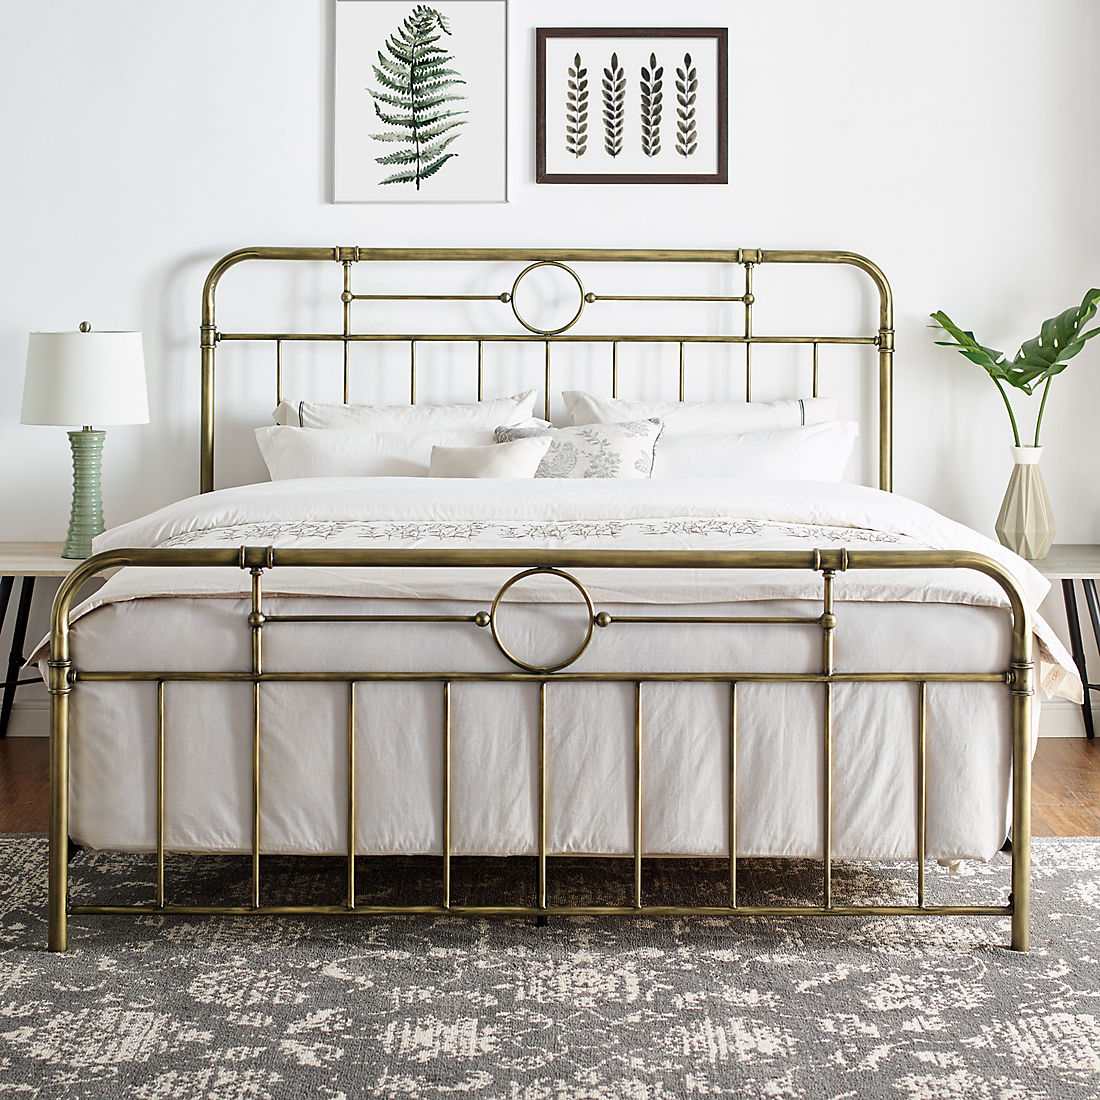 Bohemian King Size Metal Pipe Bed Frame, King Size Bed Rails